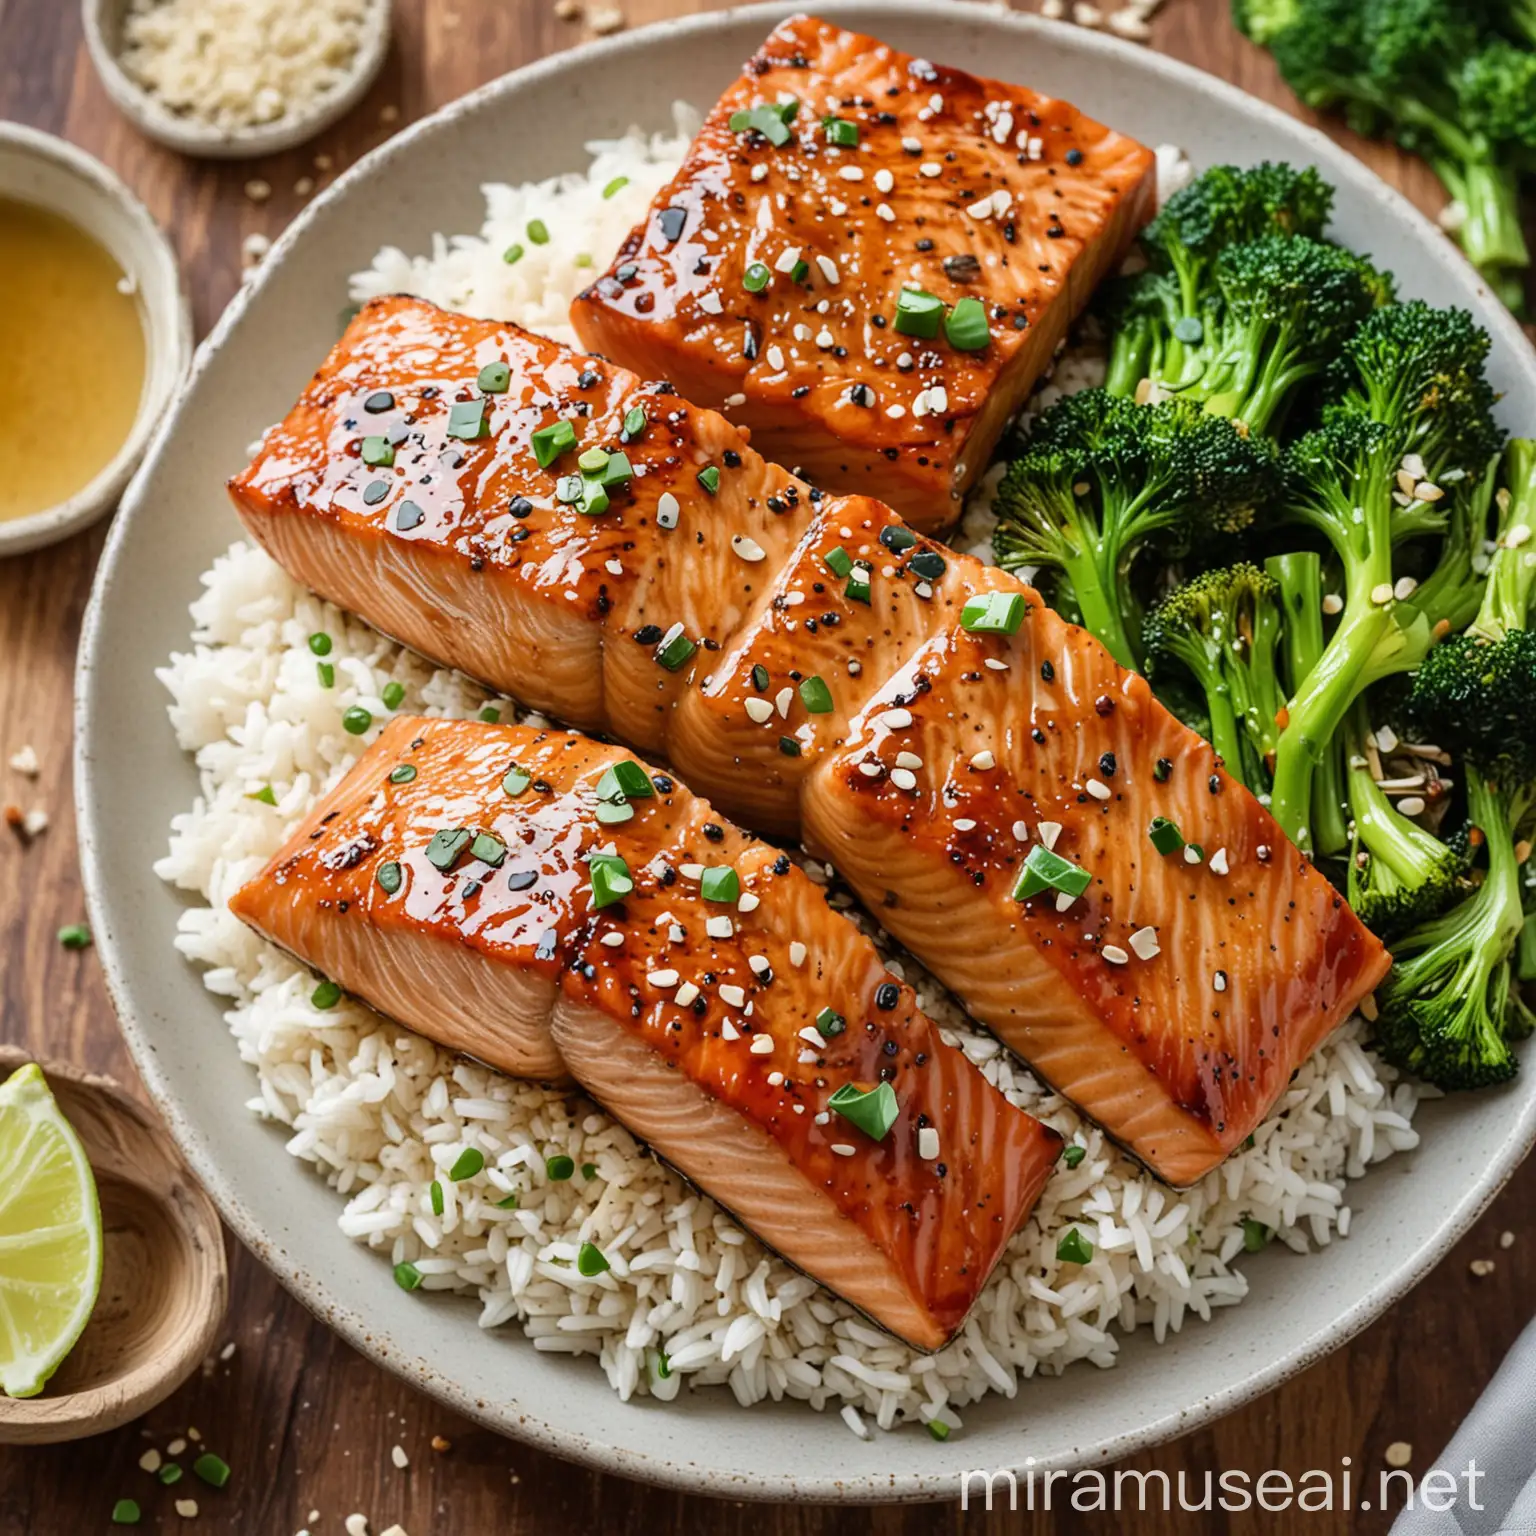 Delicious Honey Garlic Salmon with Sesame Seeds and Steamed Broccoli